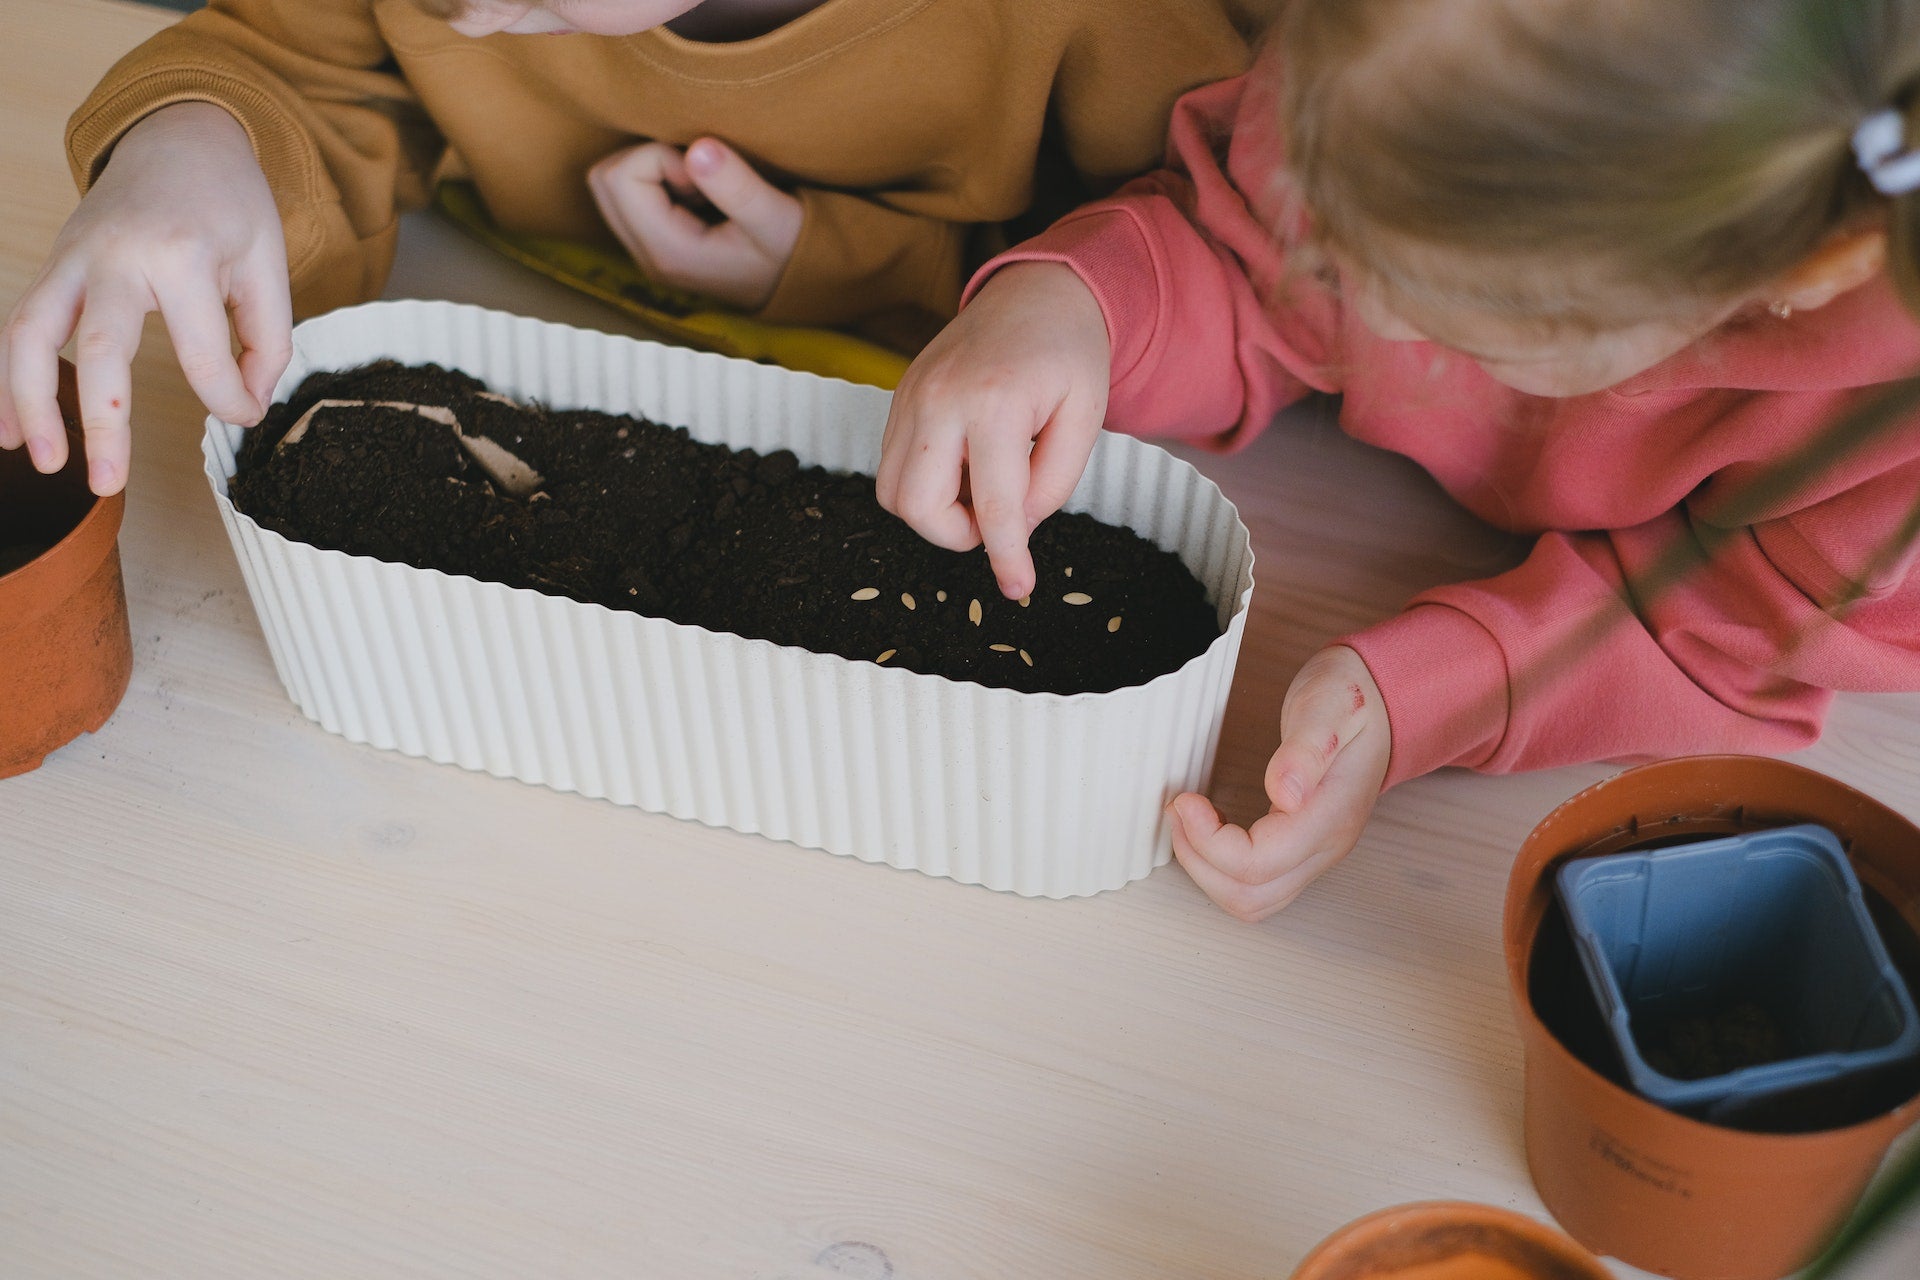 Winter Wonderland: Fun Gardening Projects and Activities to Enjoy with Kids